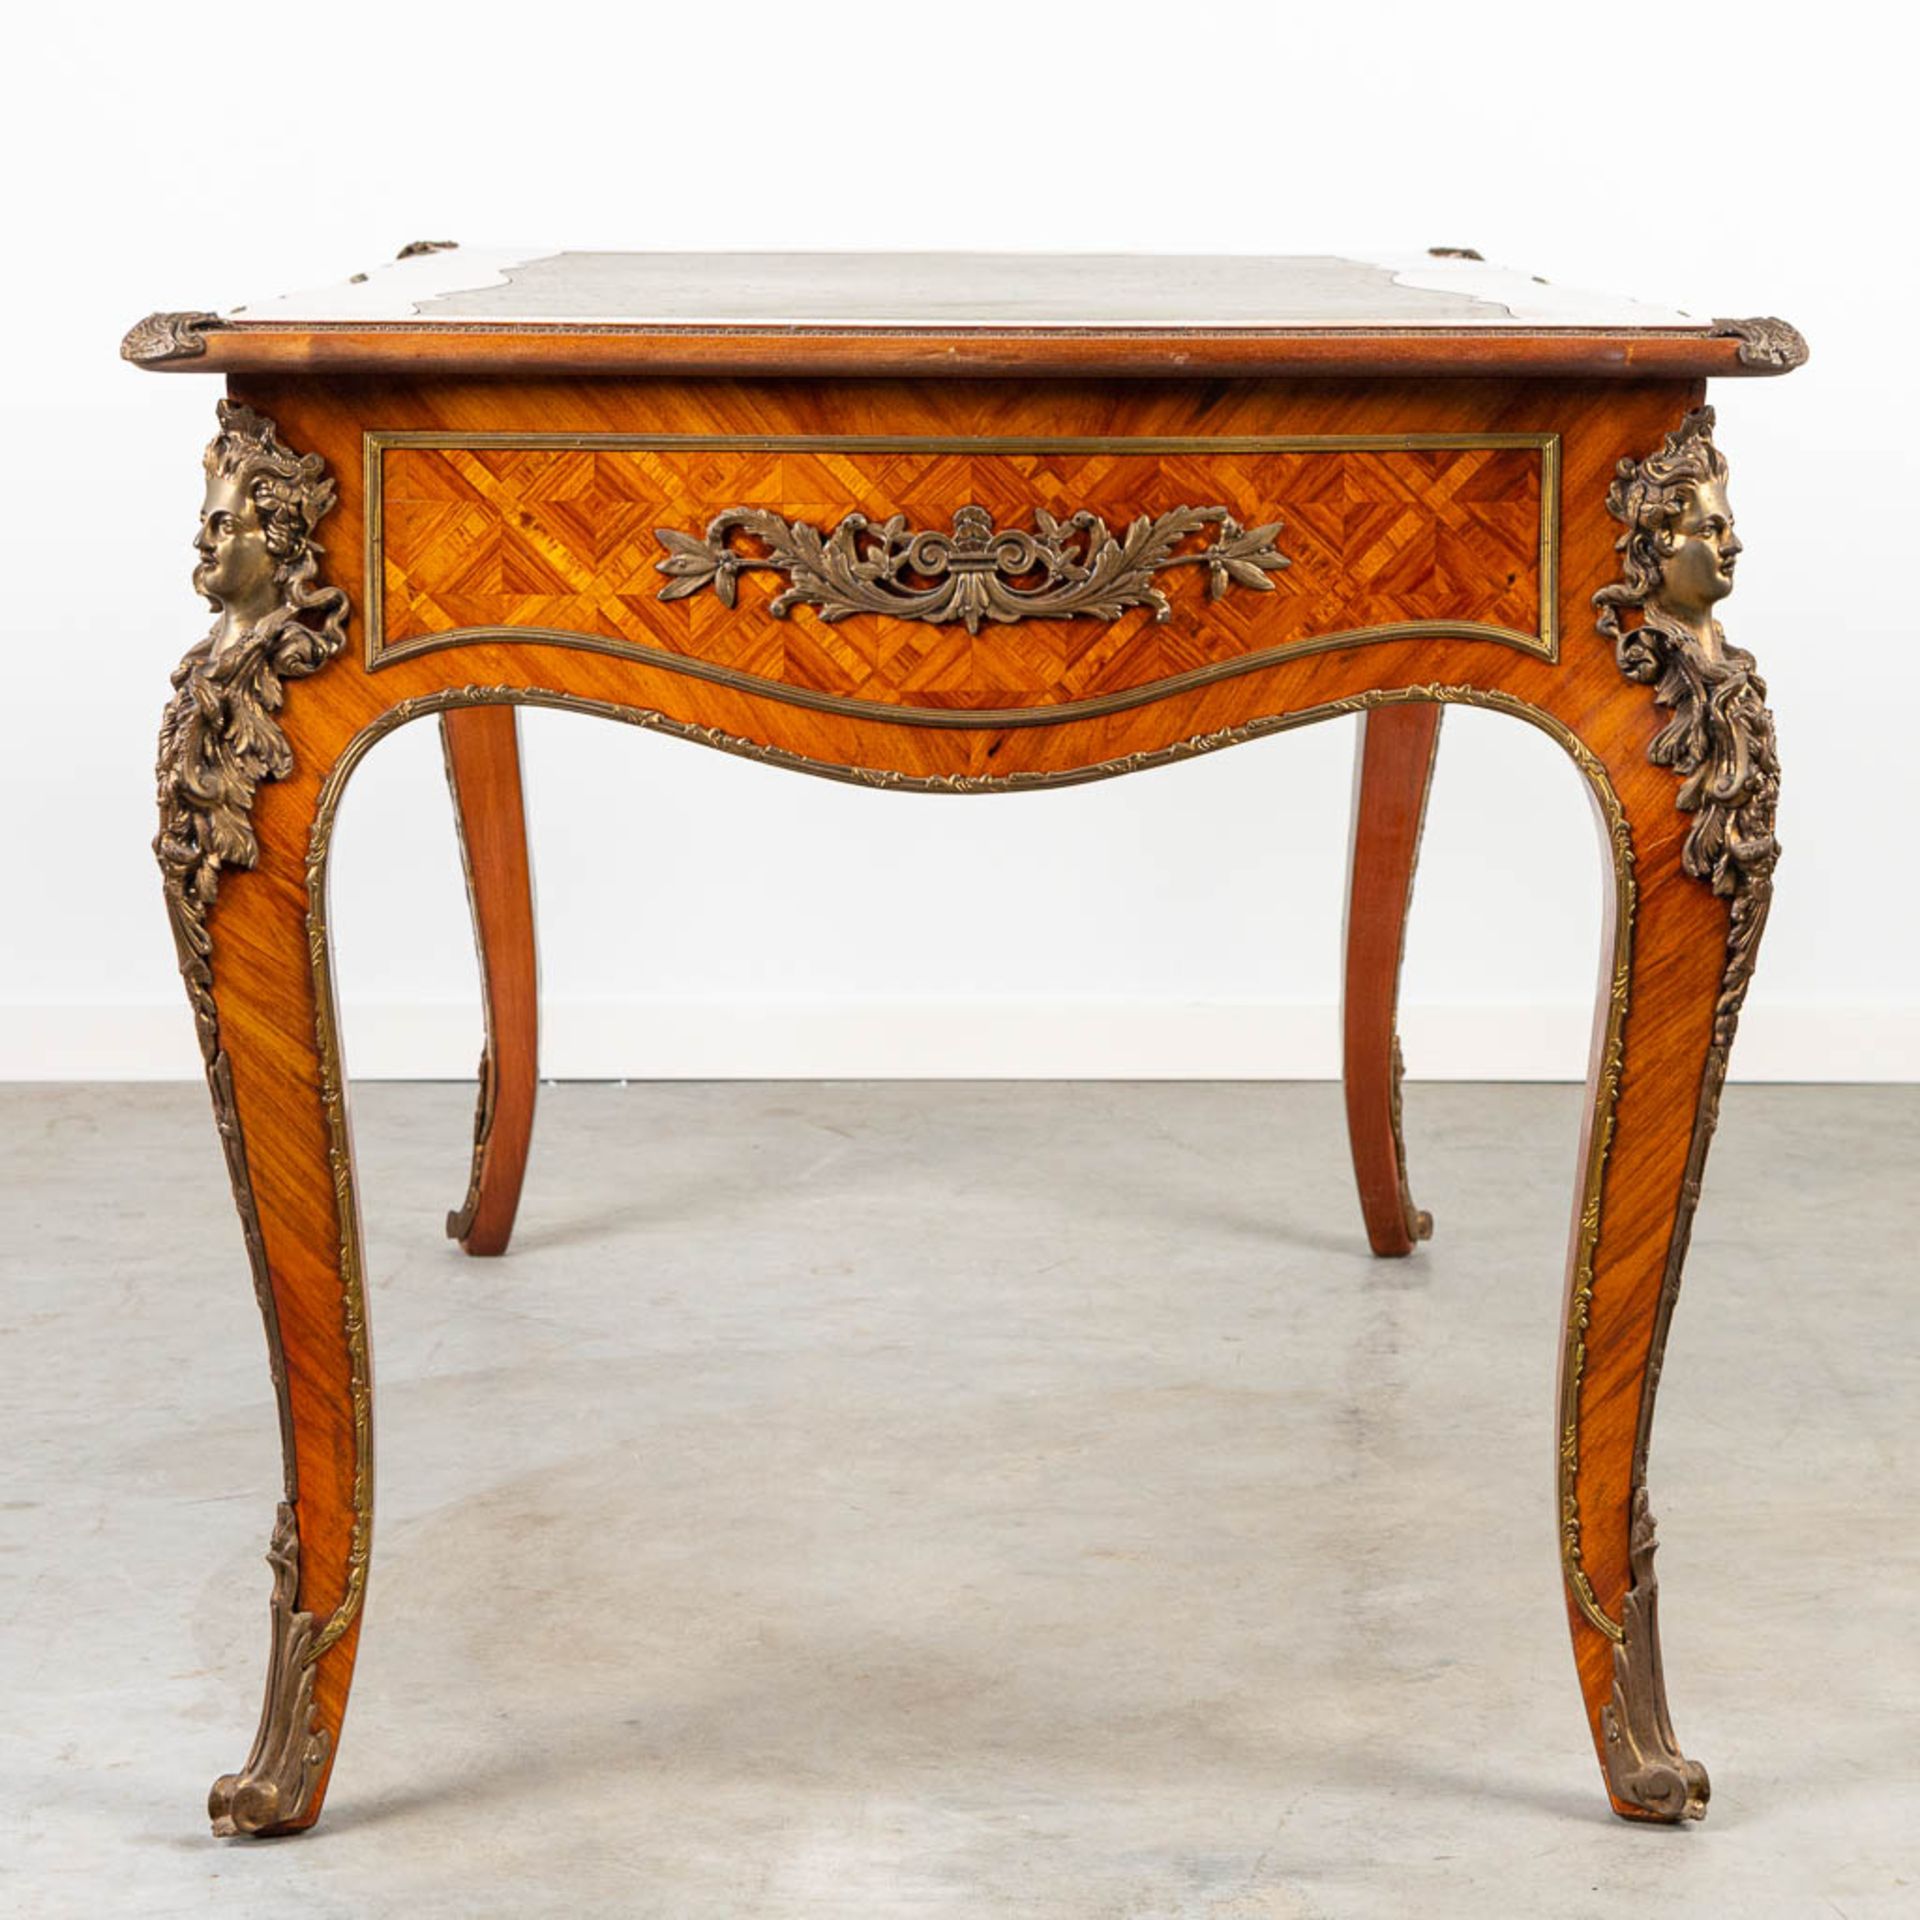 A desk and chair, mounted with bronze in Louis XV style and finished with marquetry bronze and leath - Image 7 of 18